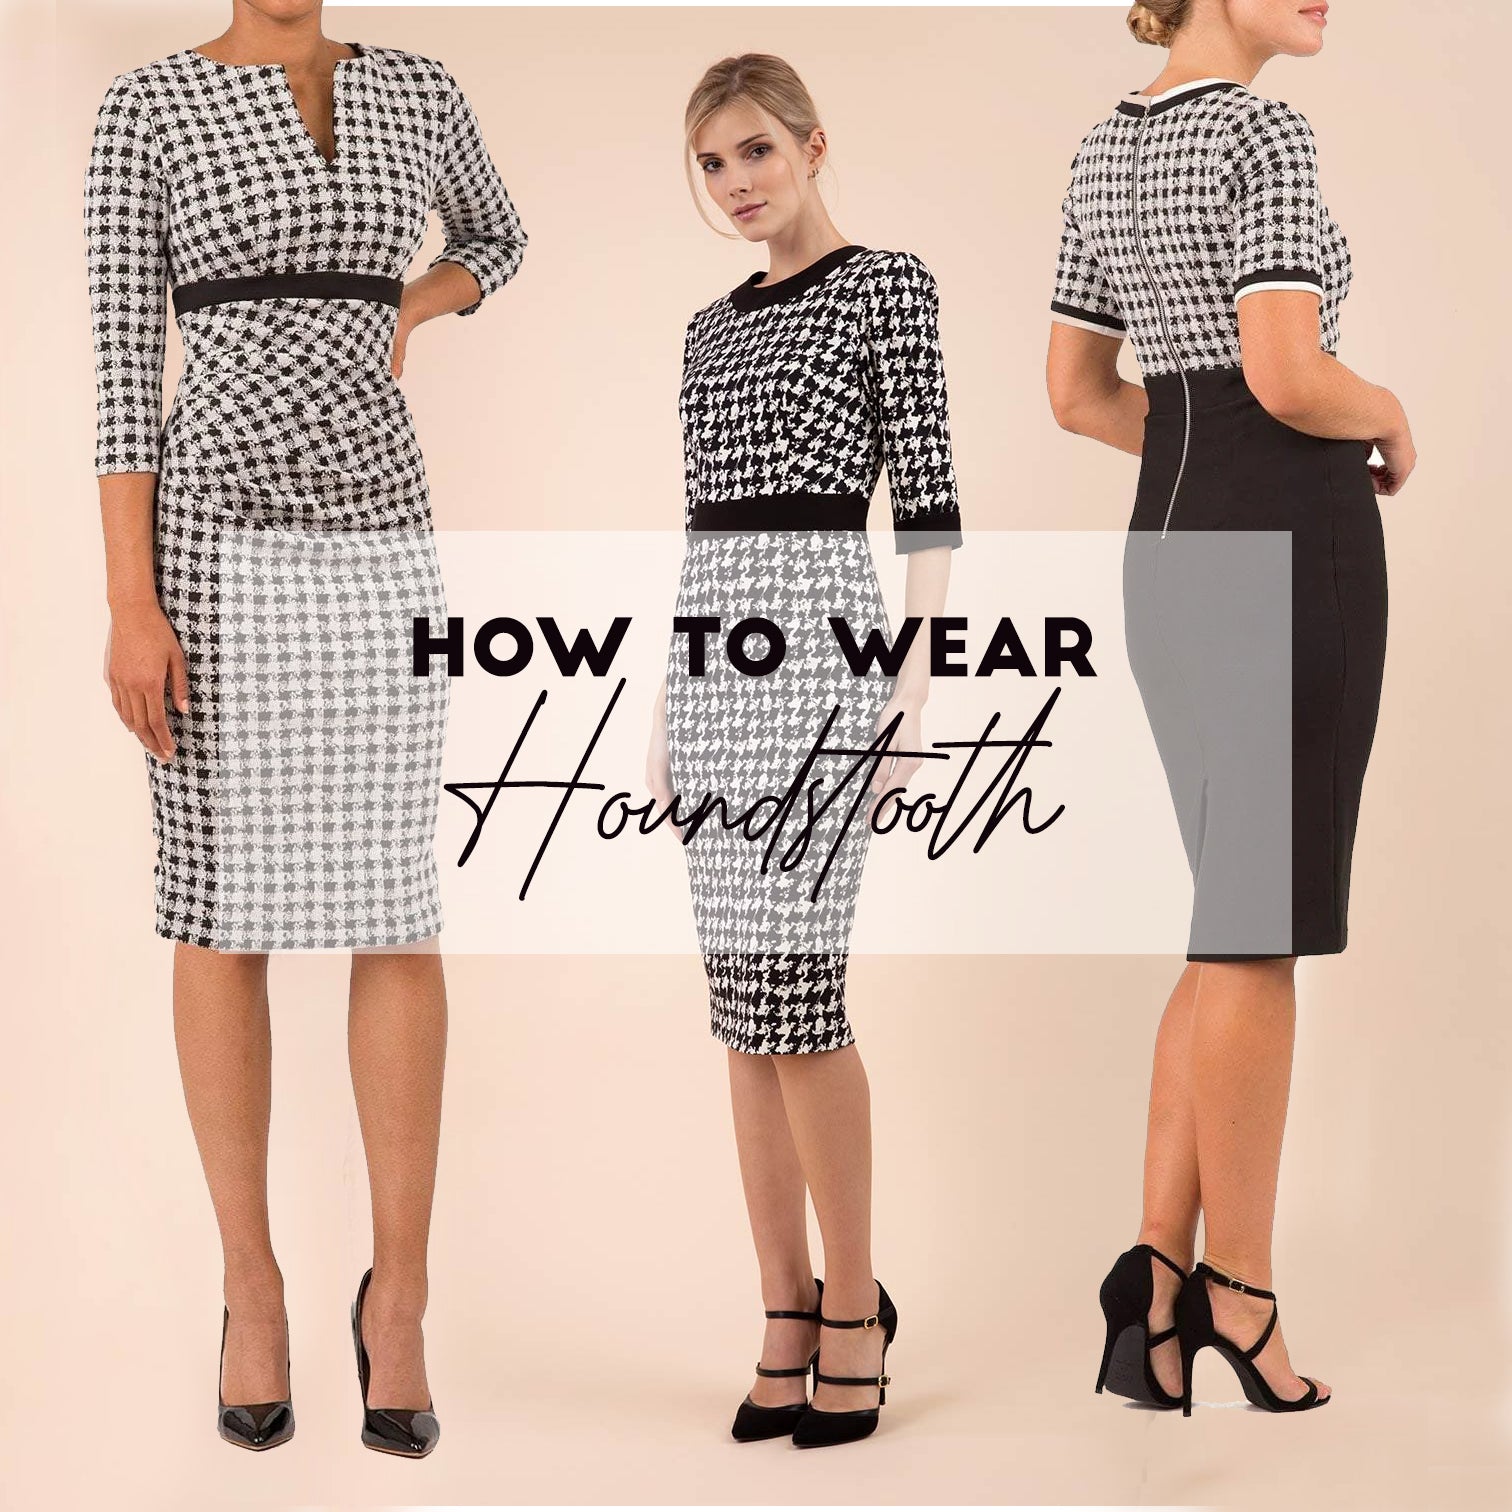 How to Wear Houndstooth - and Where to Get the Houndstooth Dress